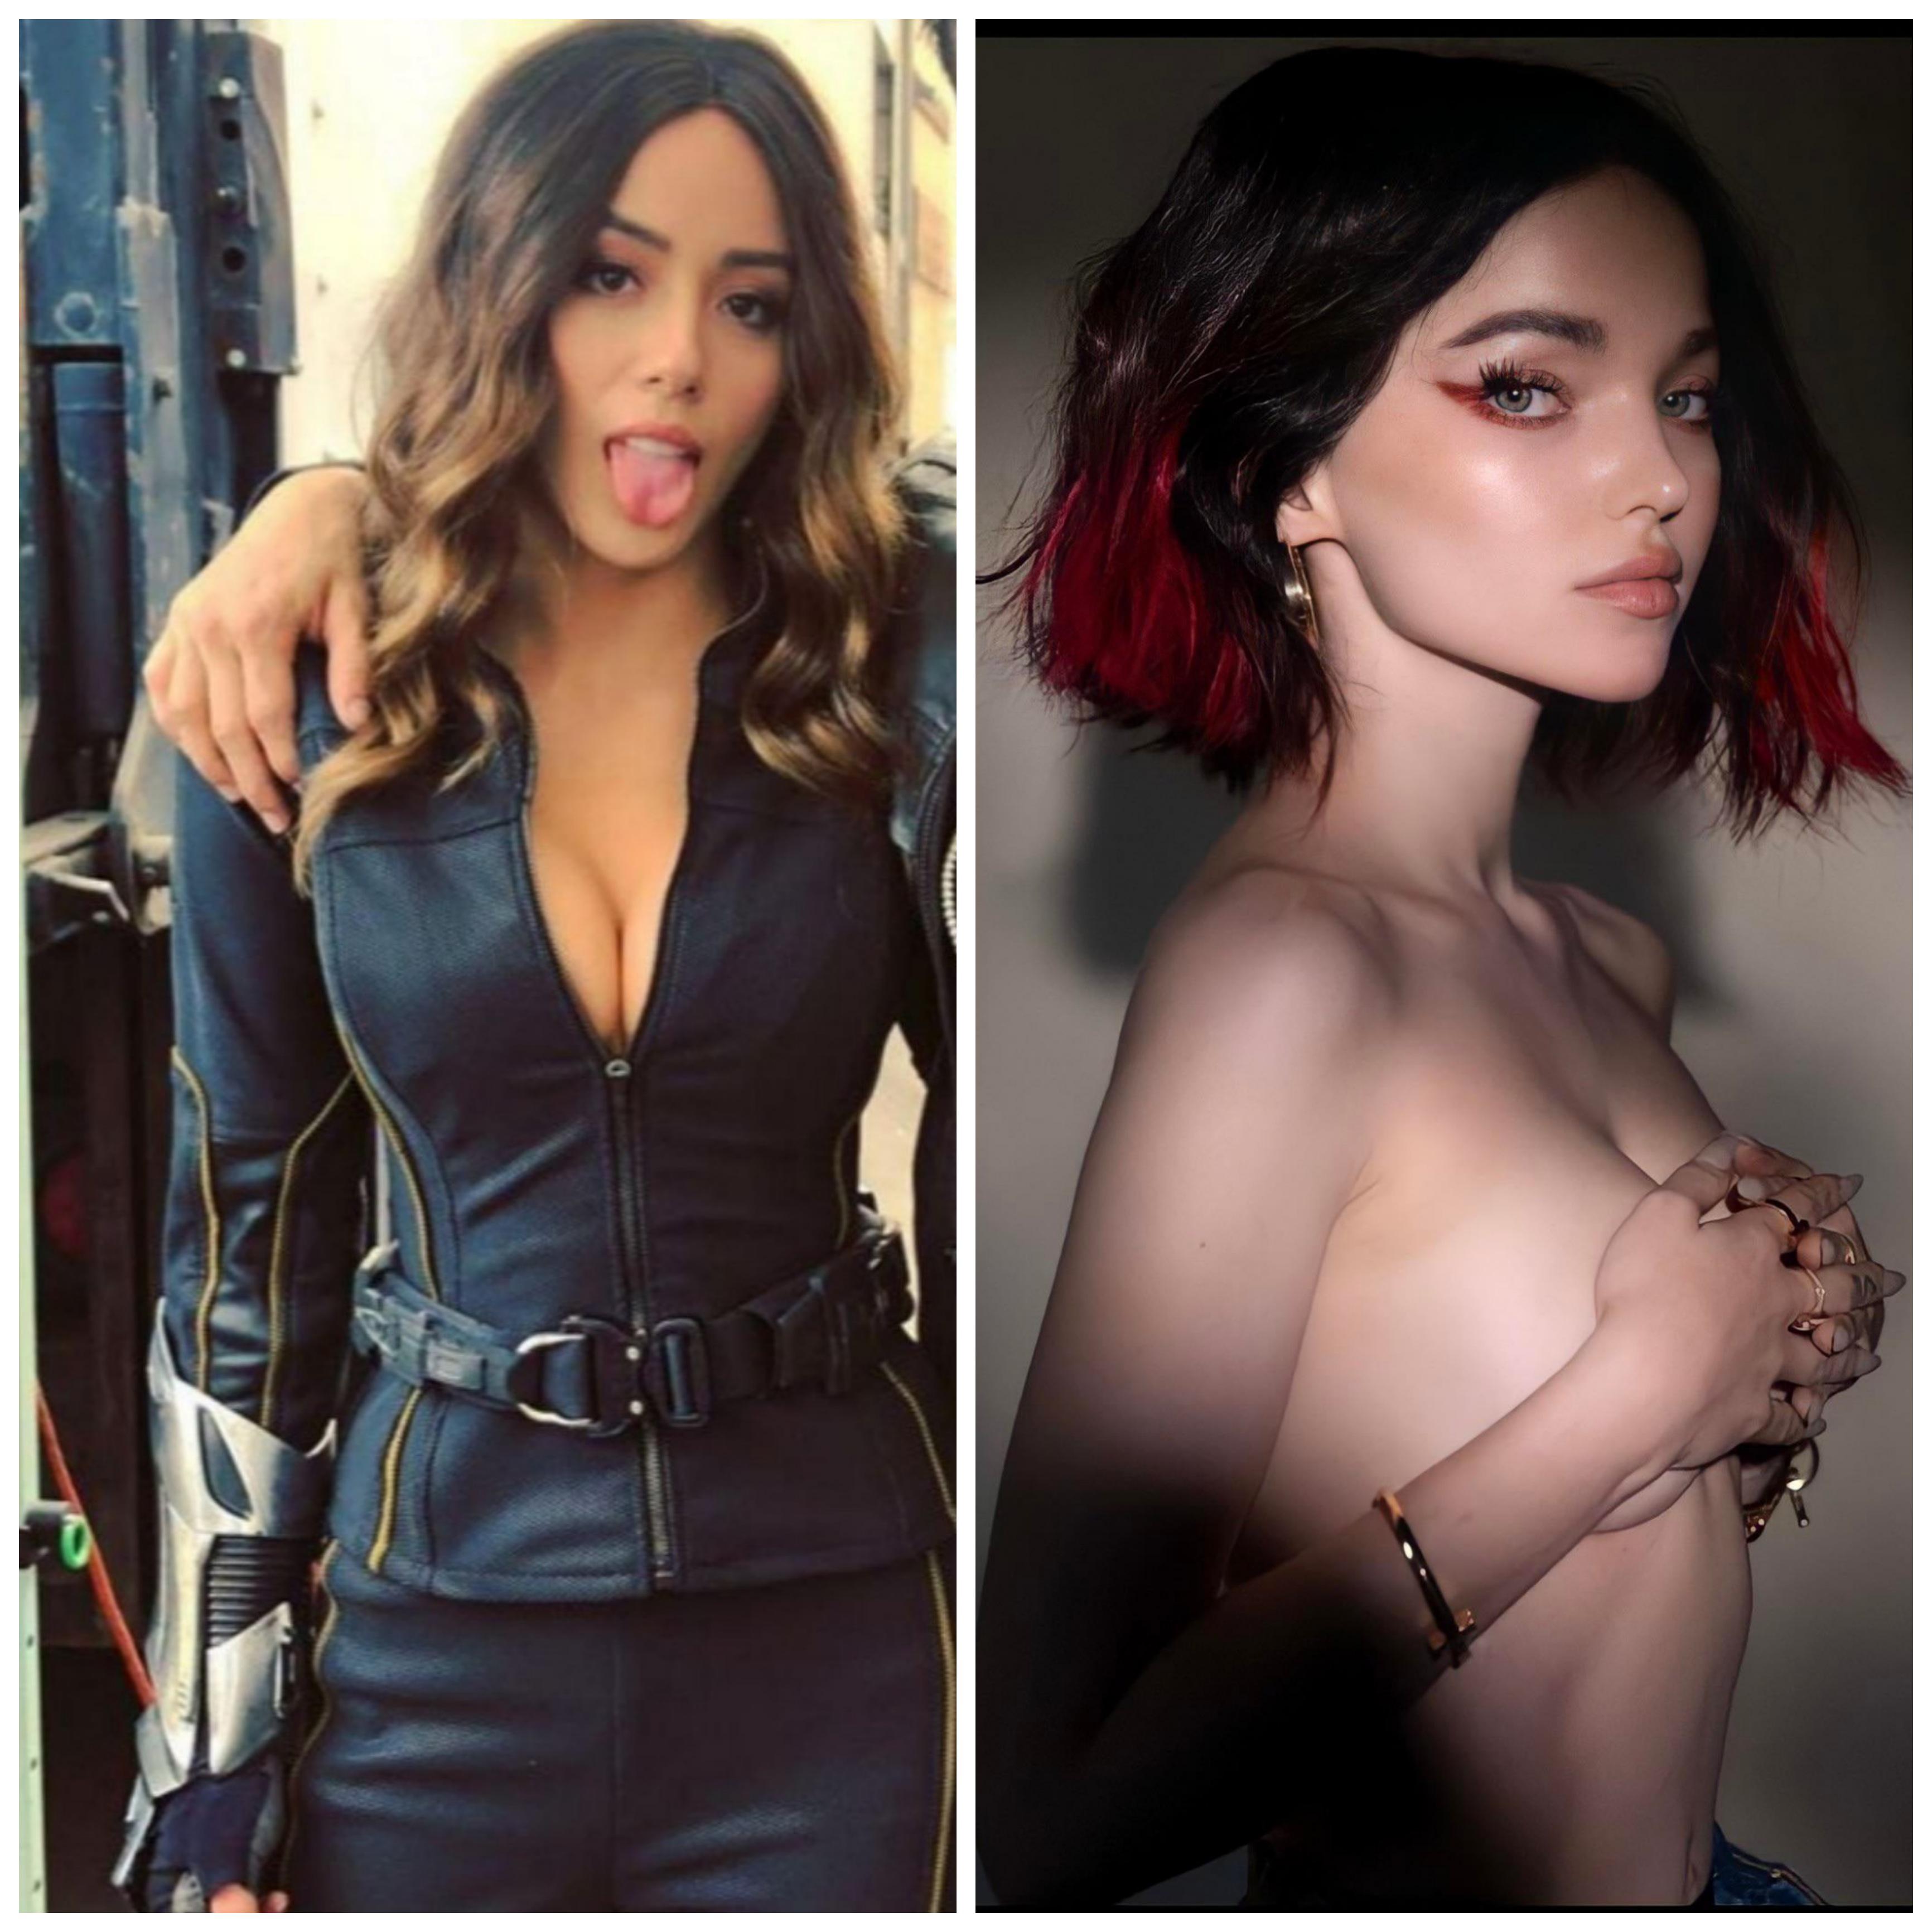 I Need Some Buds To Help Me Cum For Chloe Bennet Or Dove Cameron Bi Welcom